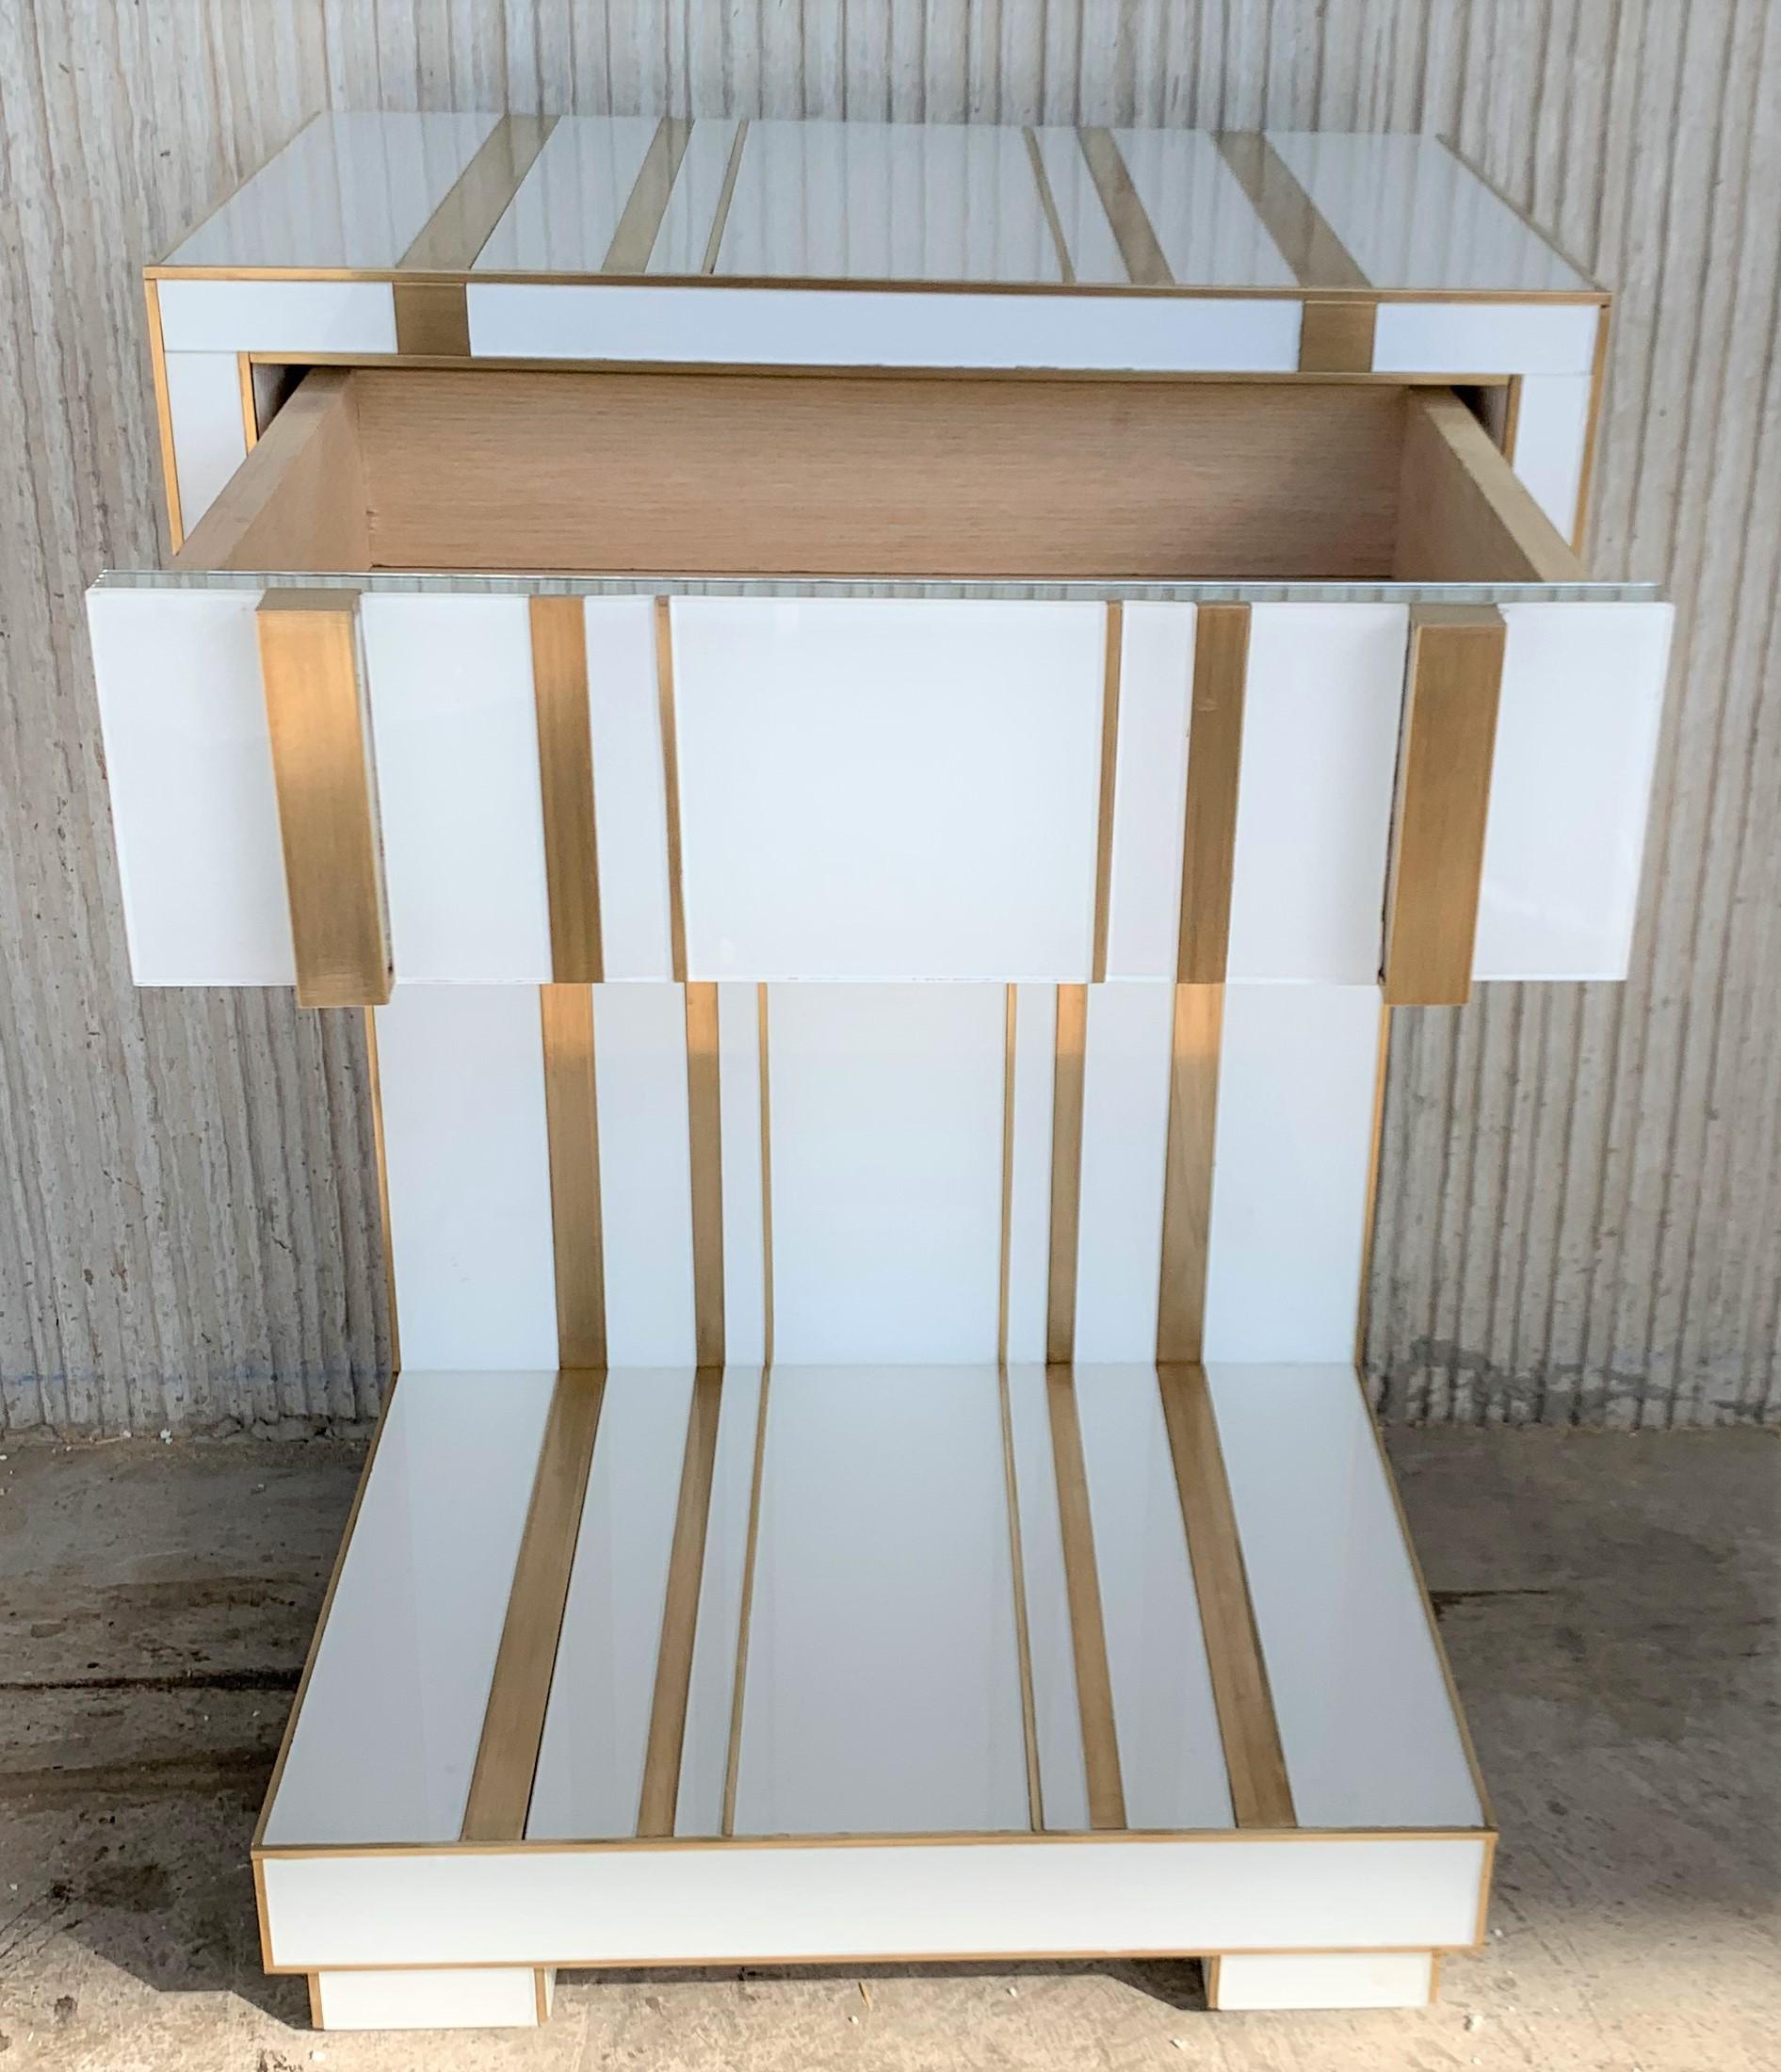 New pair of white glass and brass nightstands with one-drawer, mirrored details in drawers.
Soft push system opening with brake in drawers.
Two glass and brass handles


We can make it in custom size or custom color upon request.